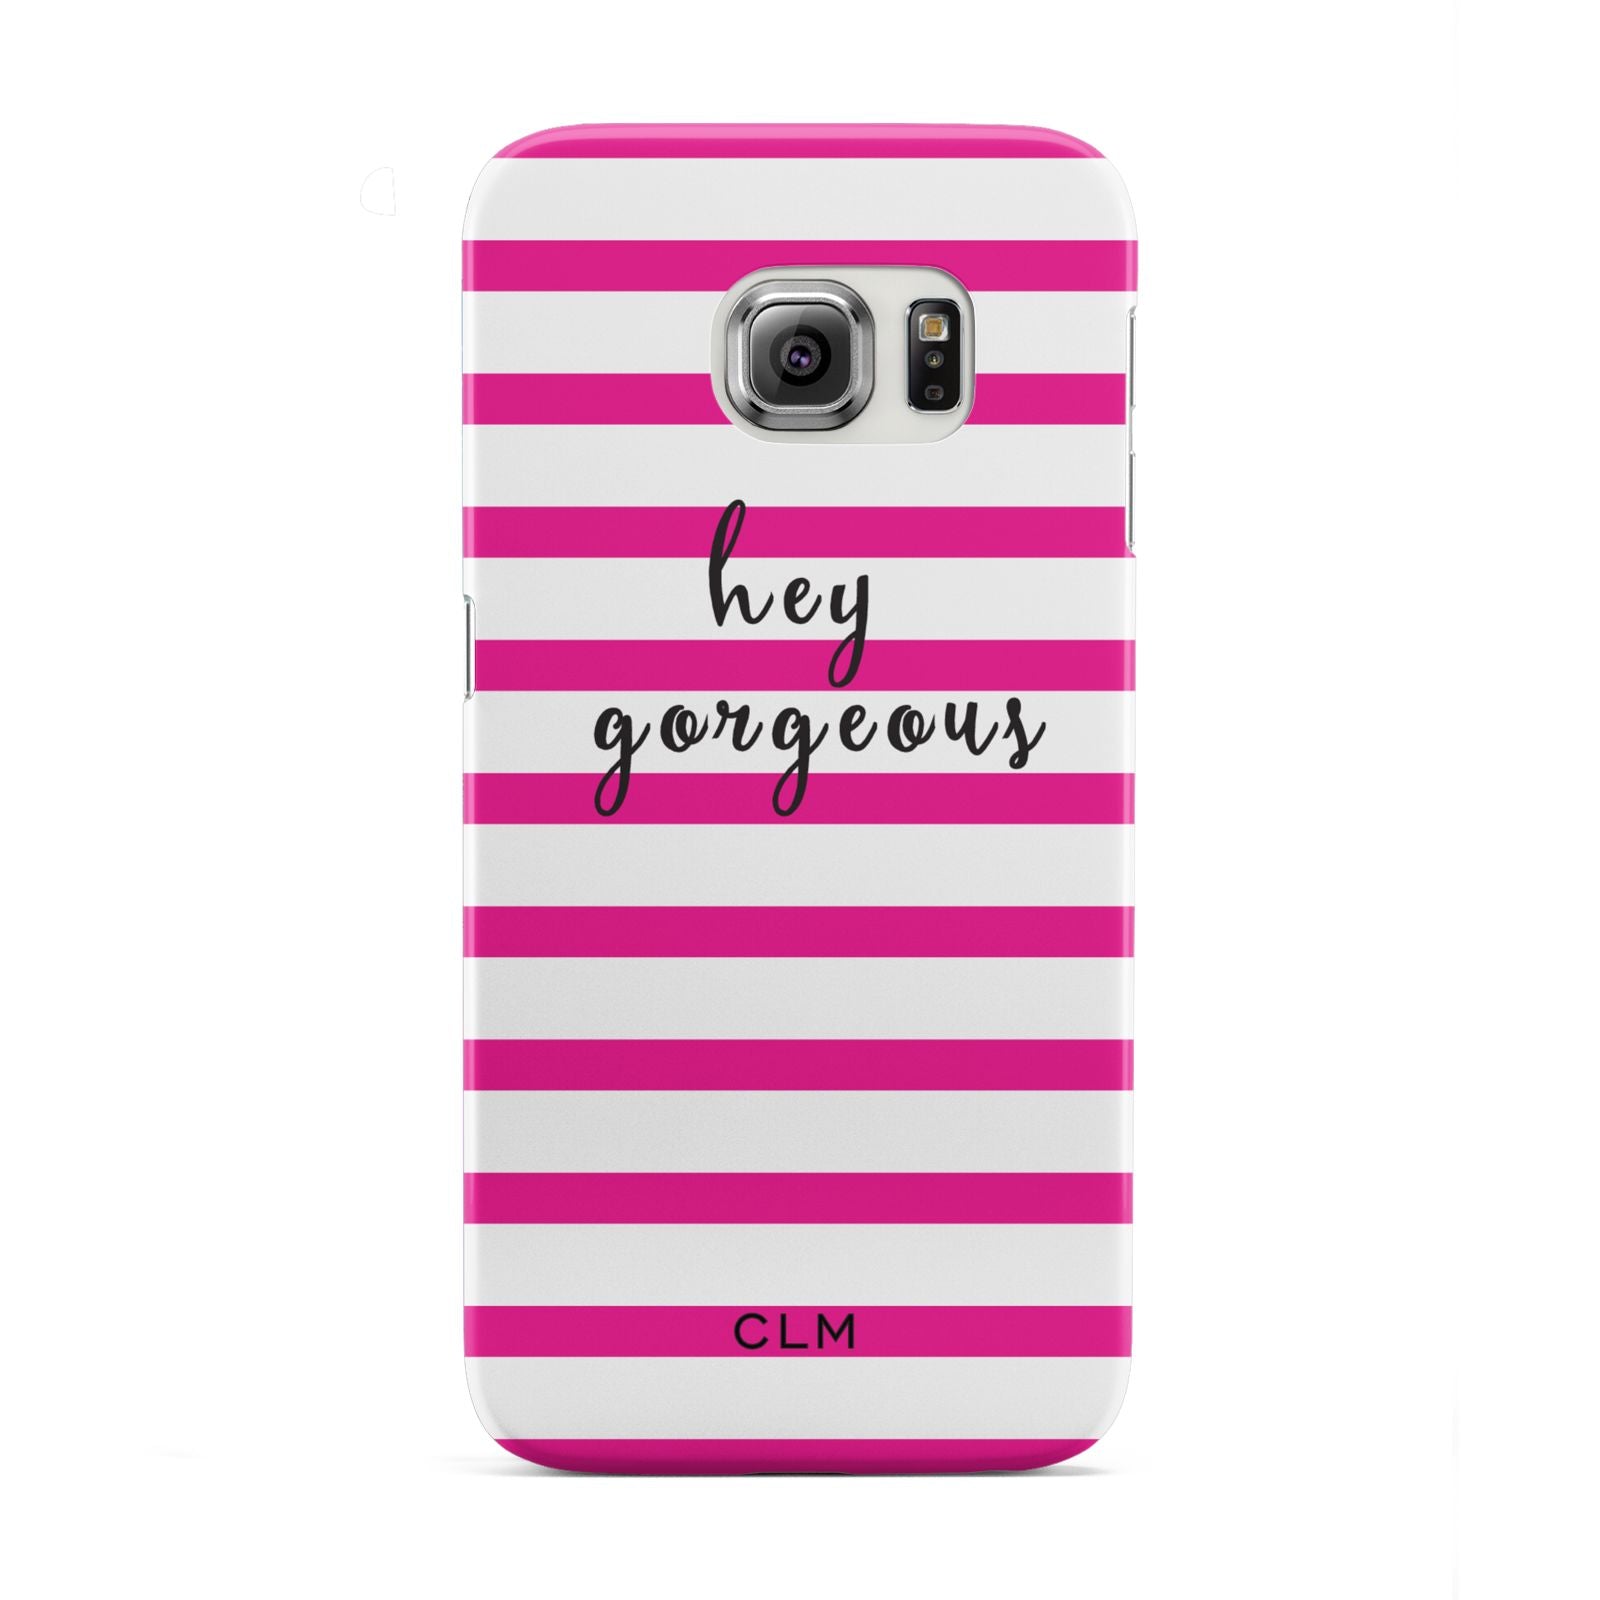 Personalised Initials Pink Striped Samsung Galaxy S6 Edge Case